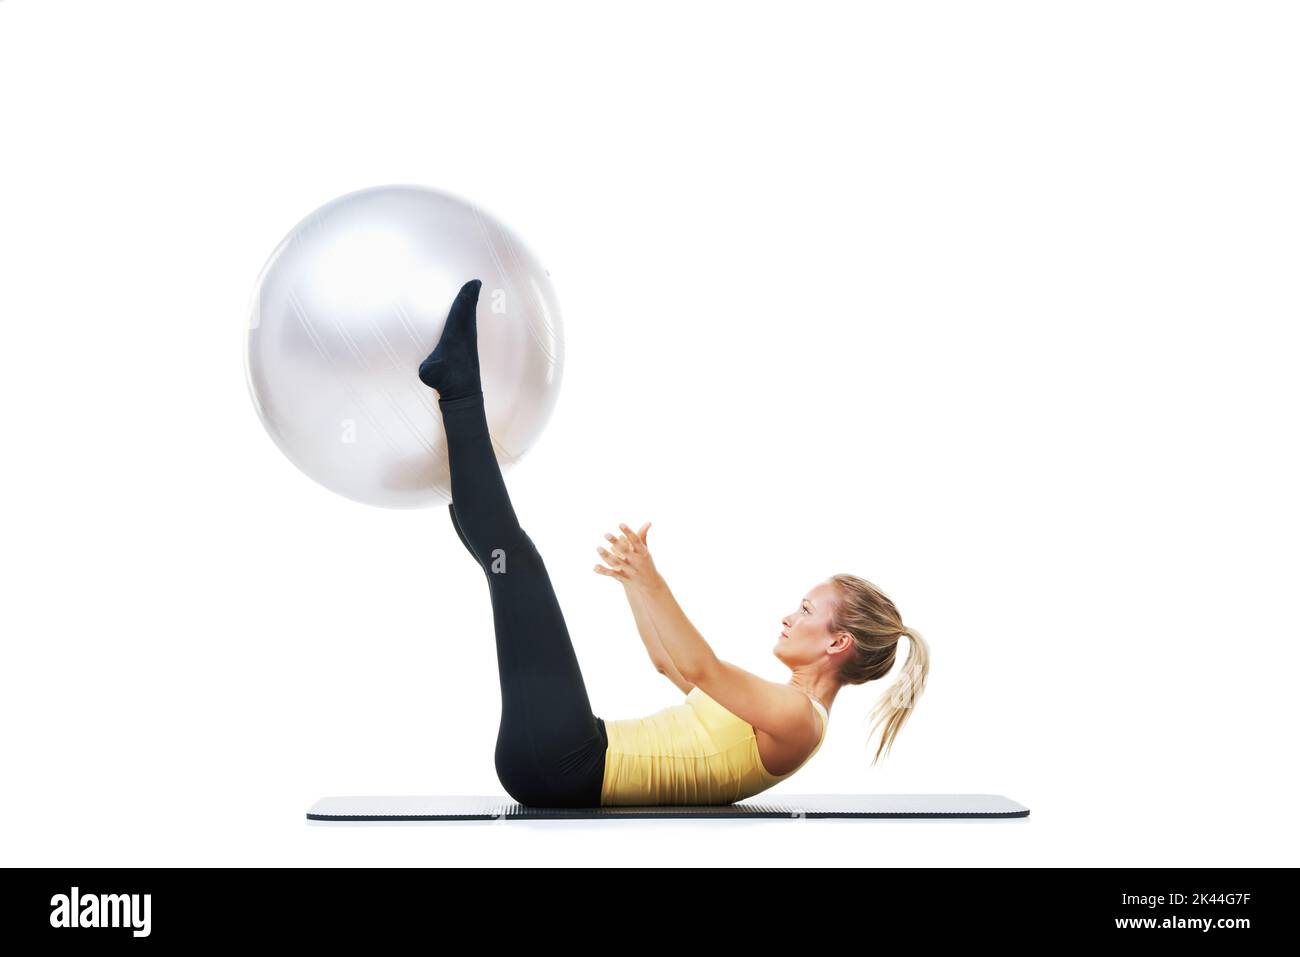 Working on toning my stomach. a female lifting an exercise ball up with her legs. Stock Photo